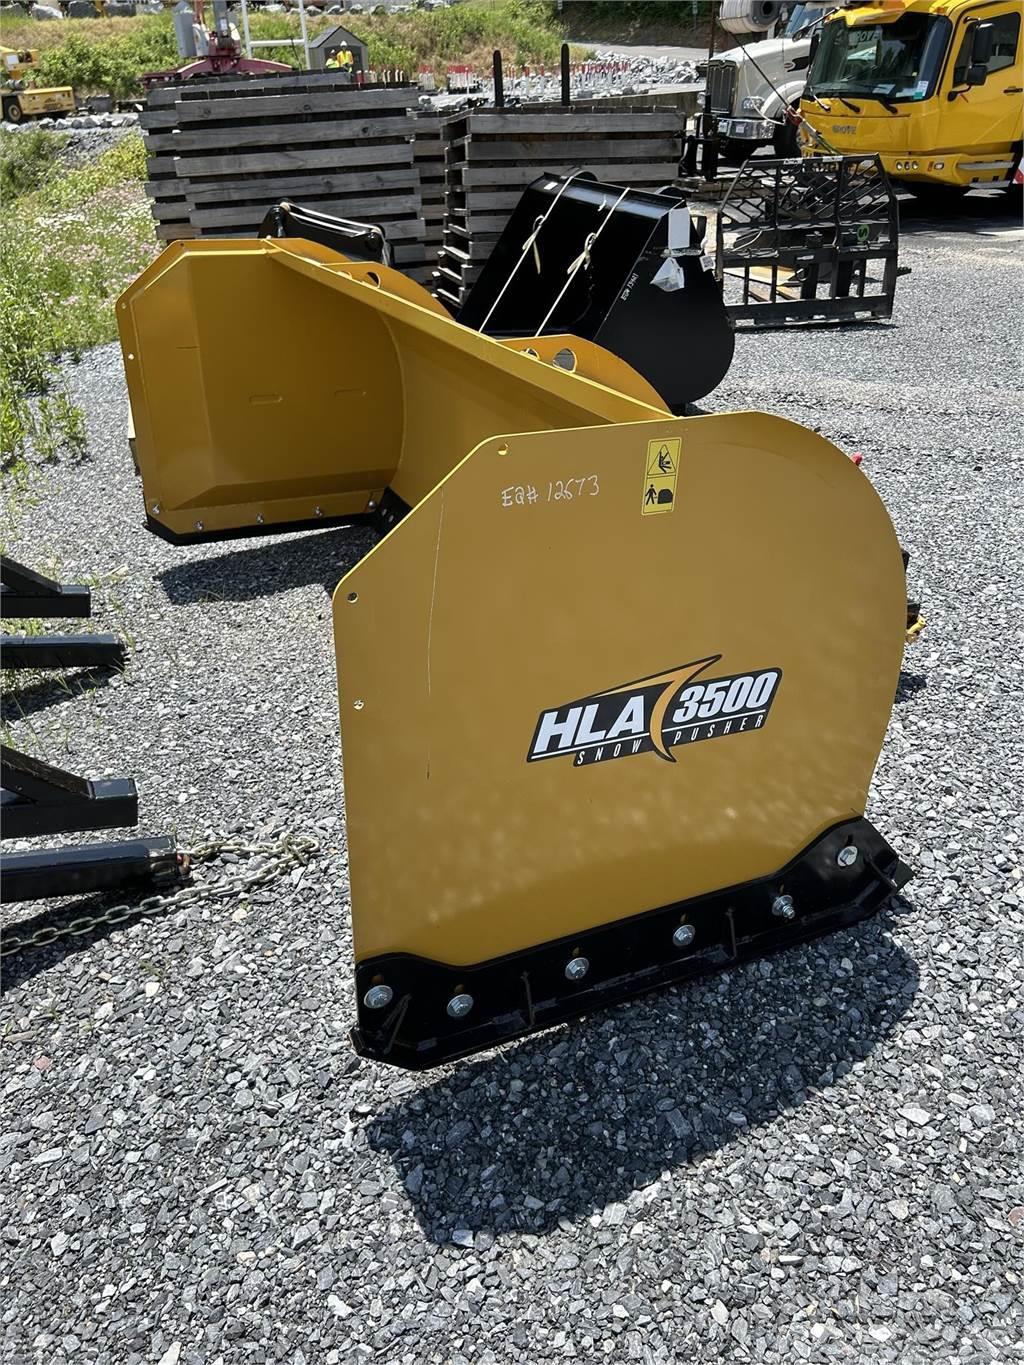 HLA SNOW 3500 Snow blades and plows